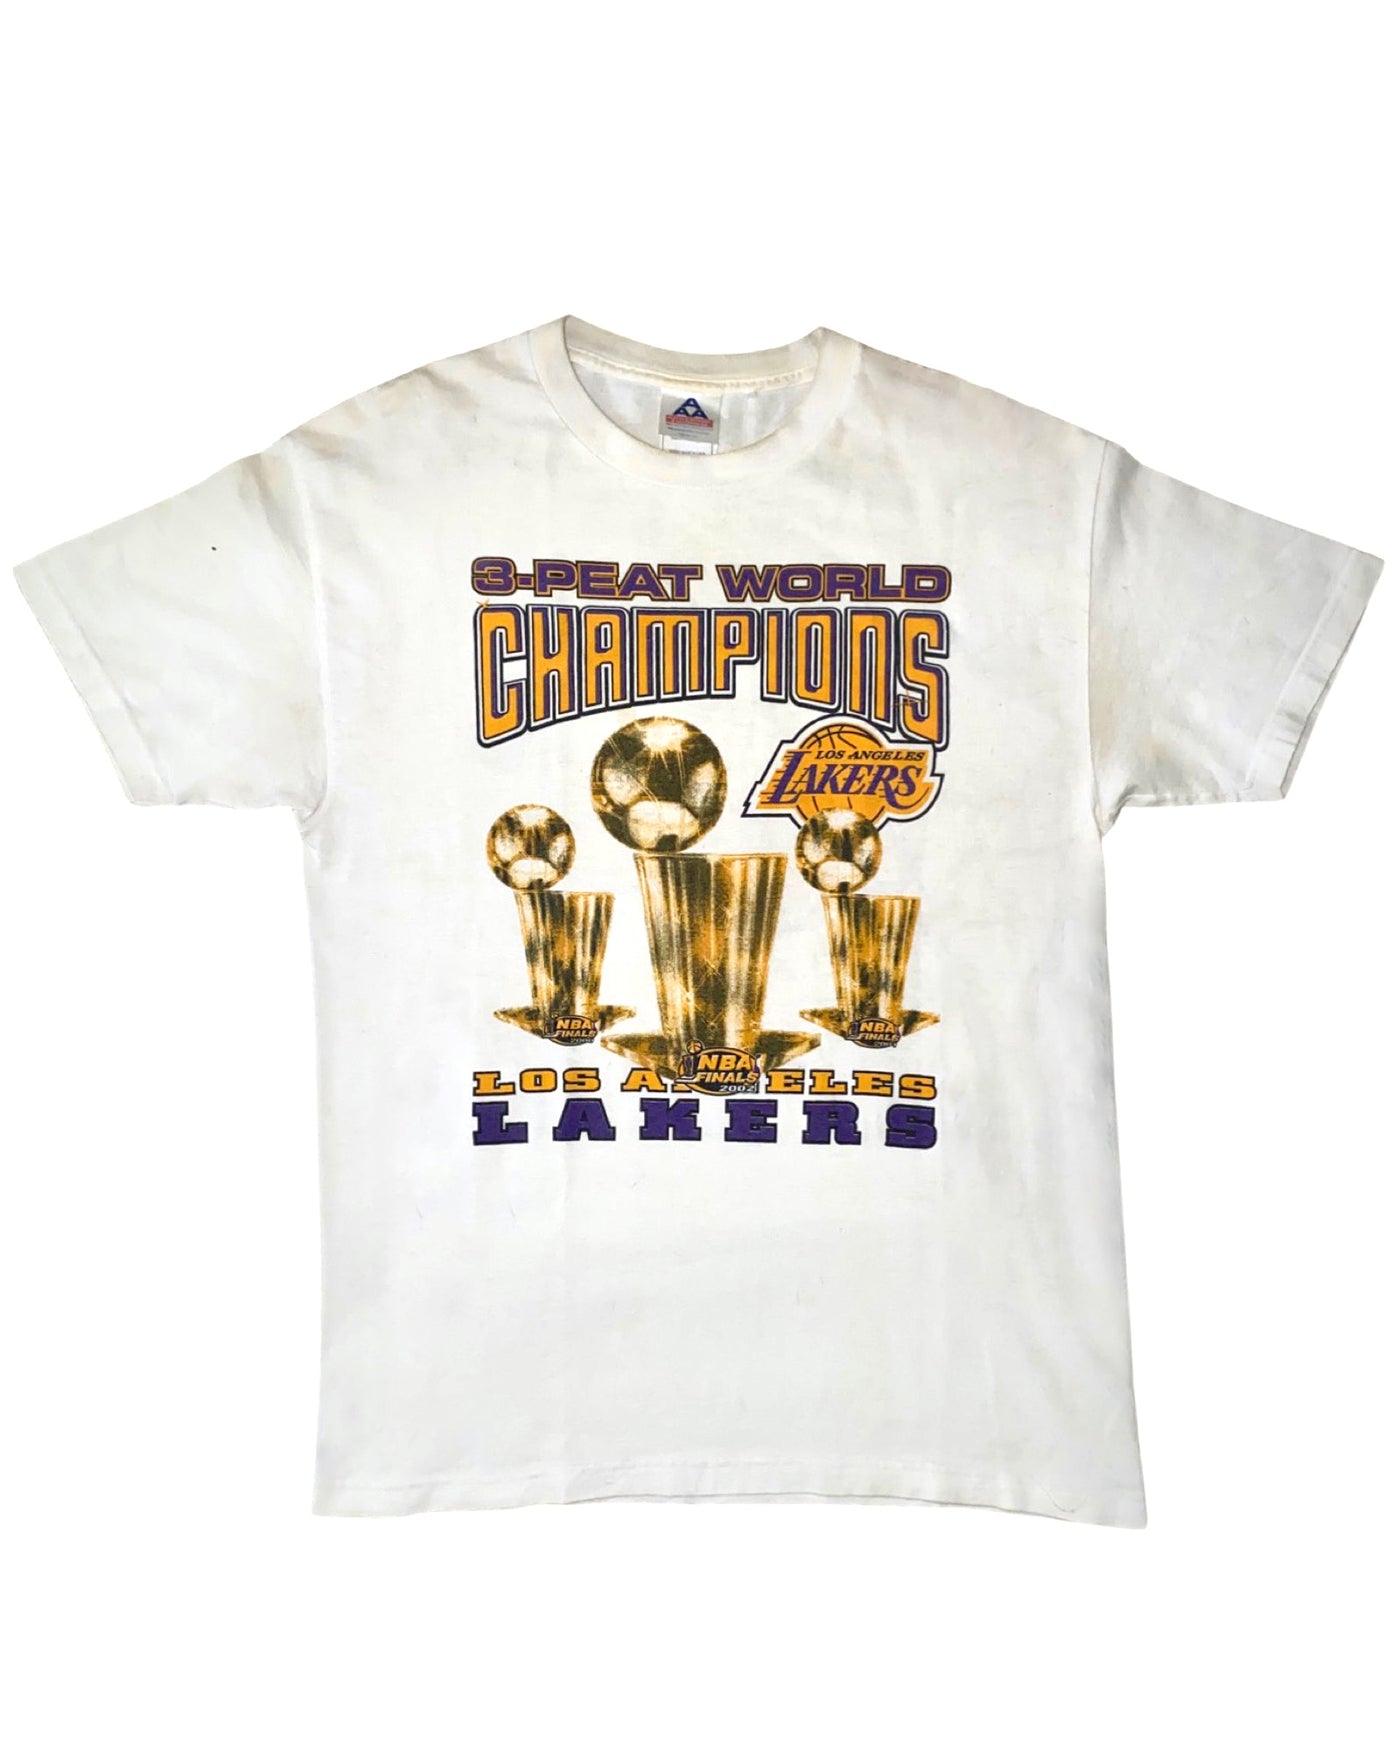 Vintage 2002 Lakers 3 Peat Double Sided Graphic T-Shirt